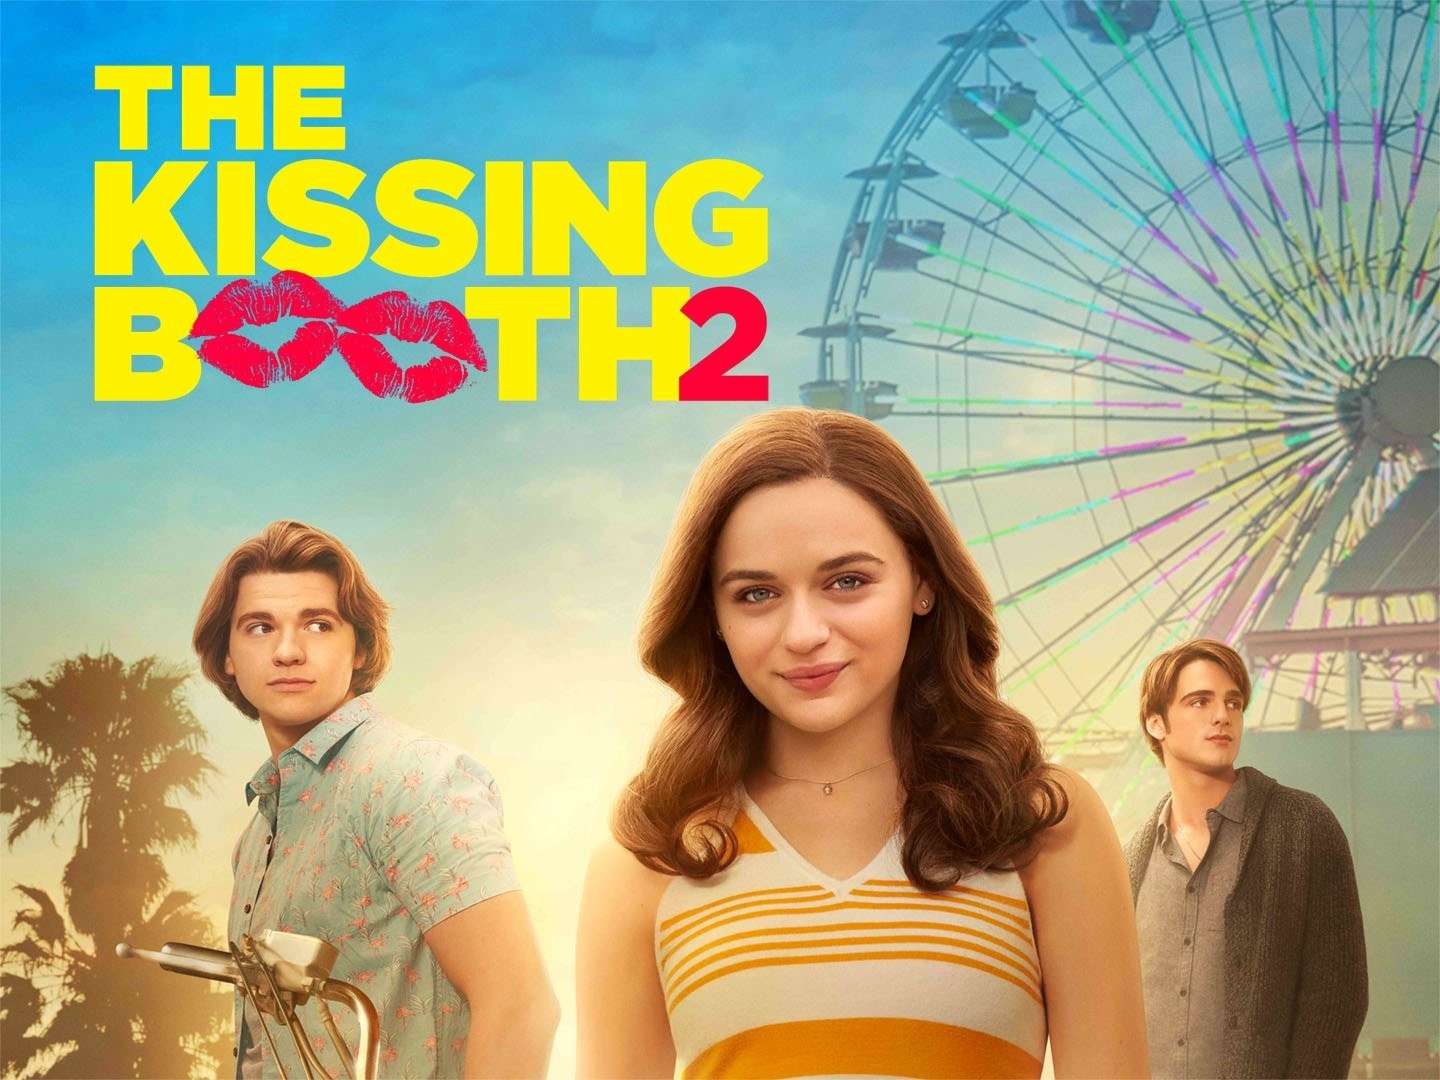 The Kissing Booth 2 - Wikipedia